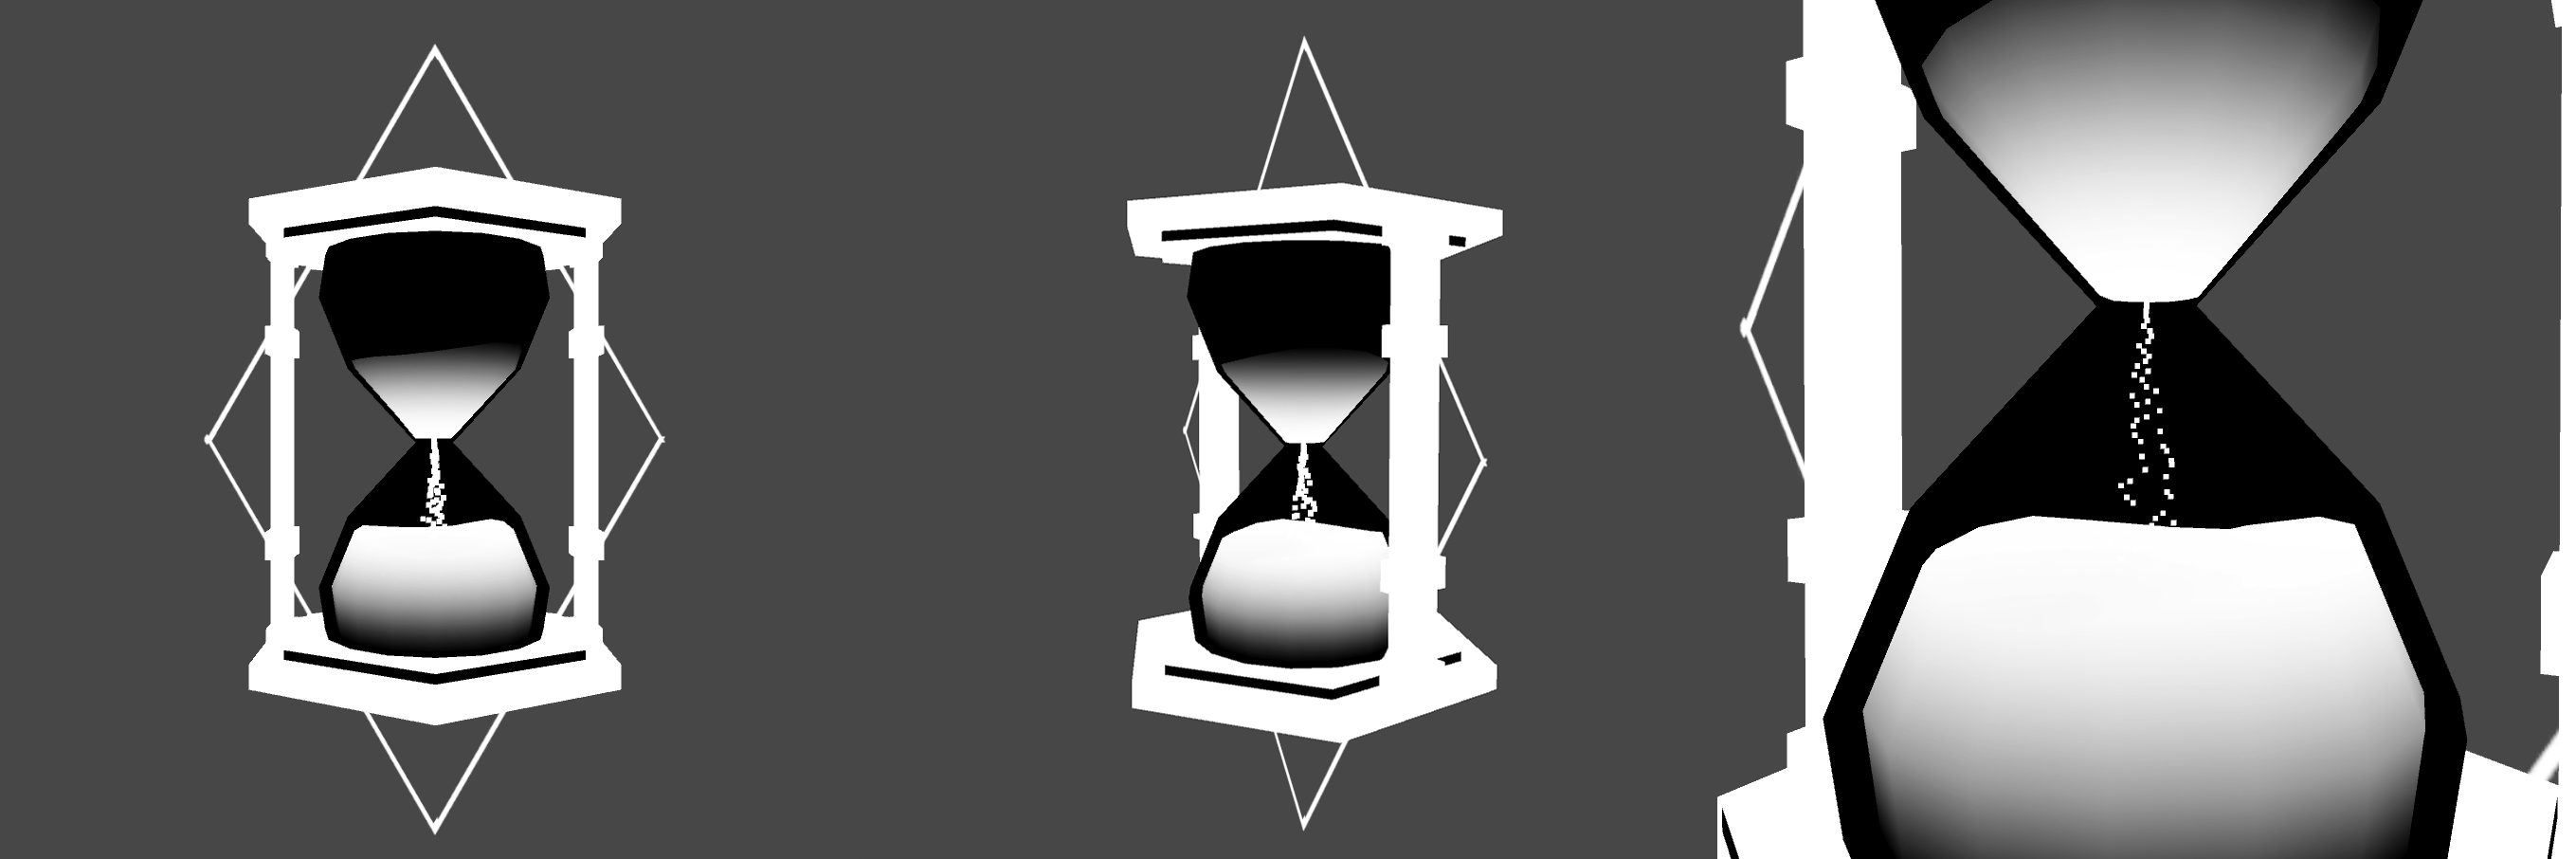 Hourglass_04.PNG